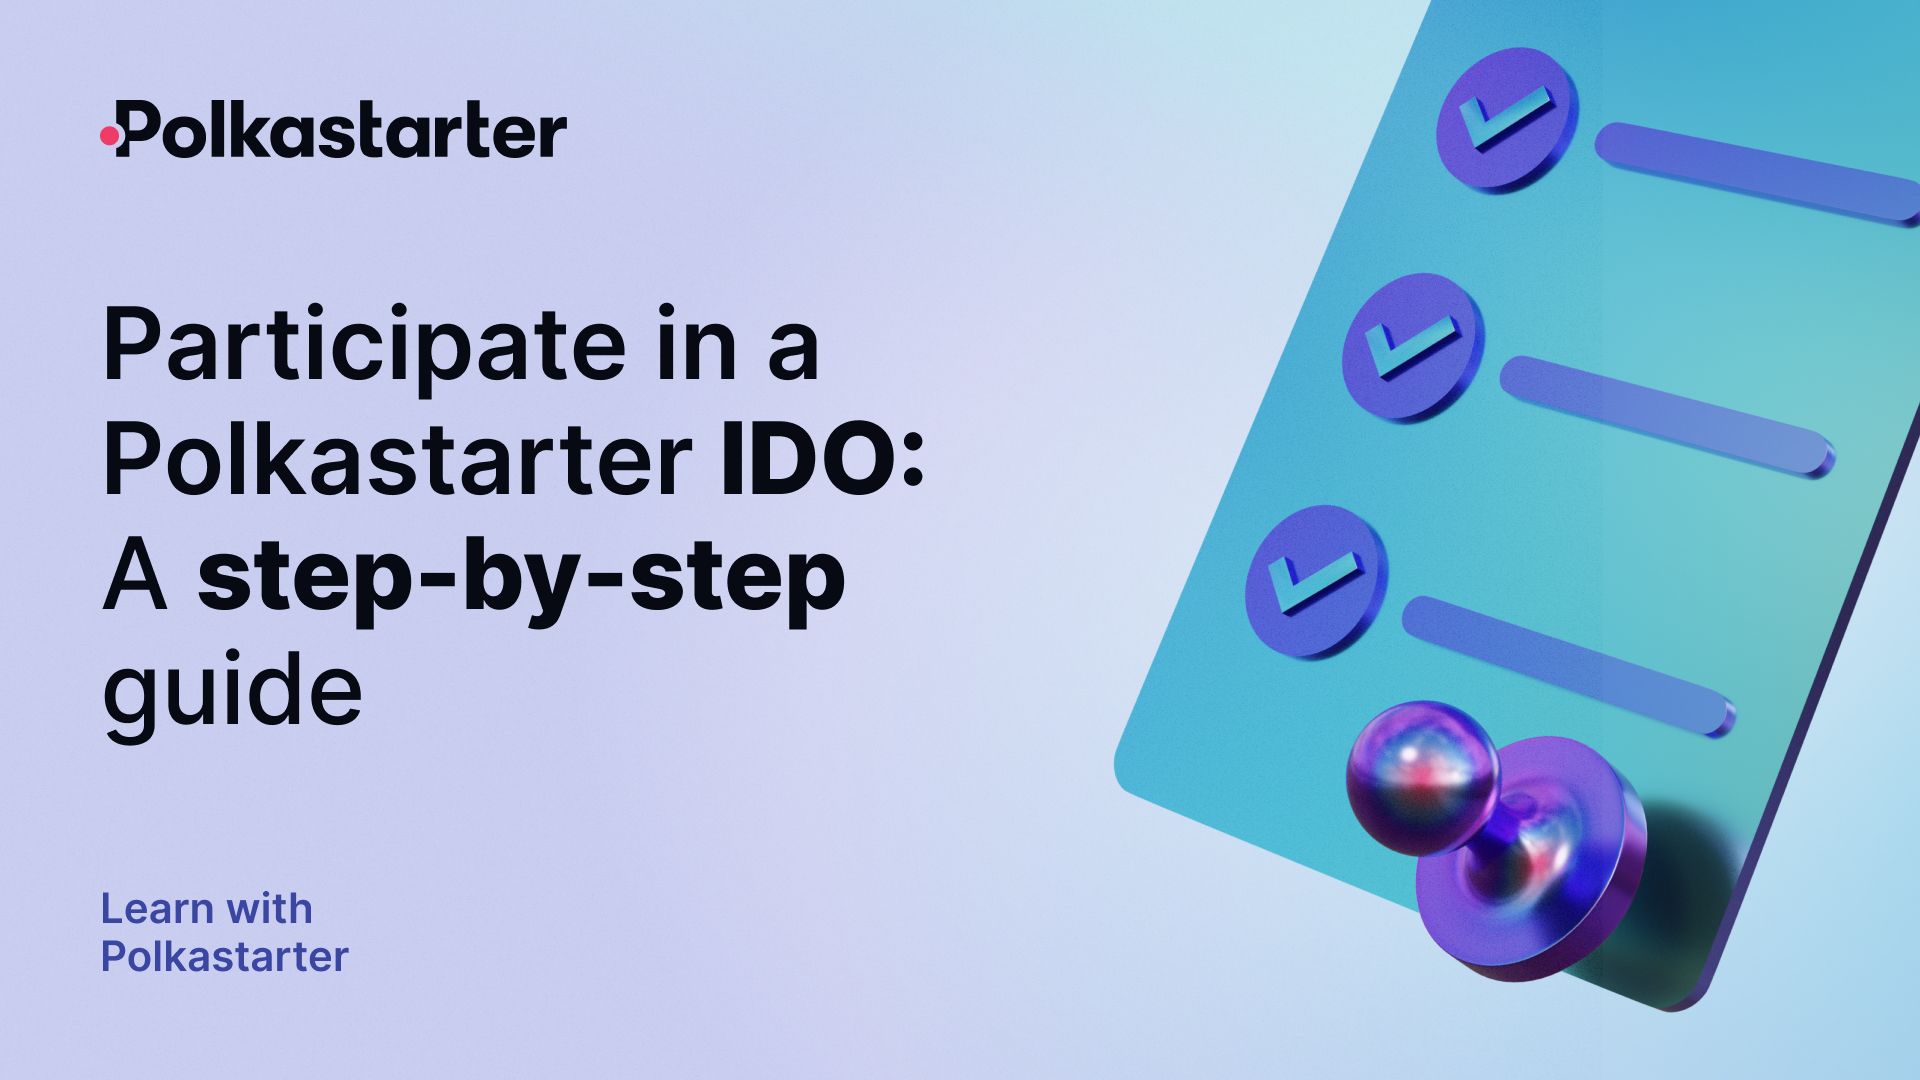 Participate in a Polkastarter IDO: a step-by-step guide